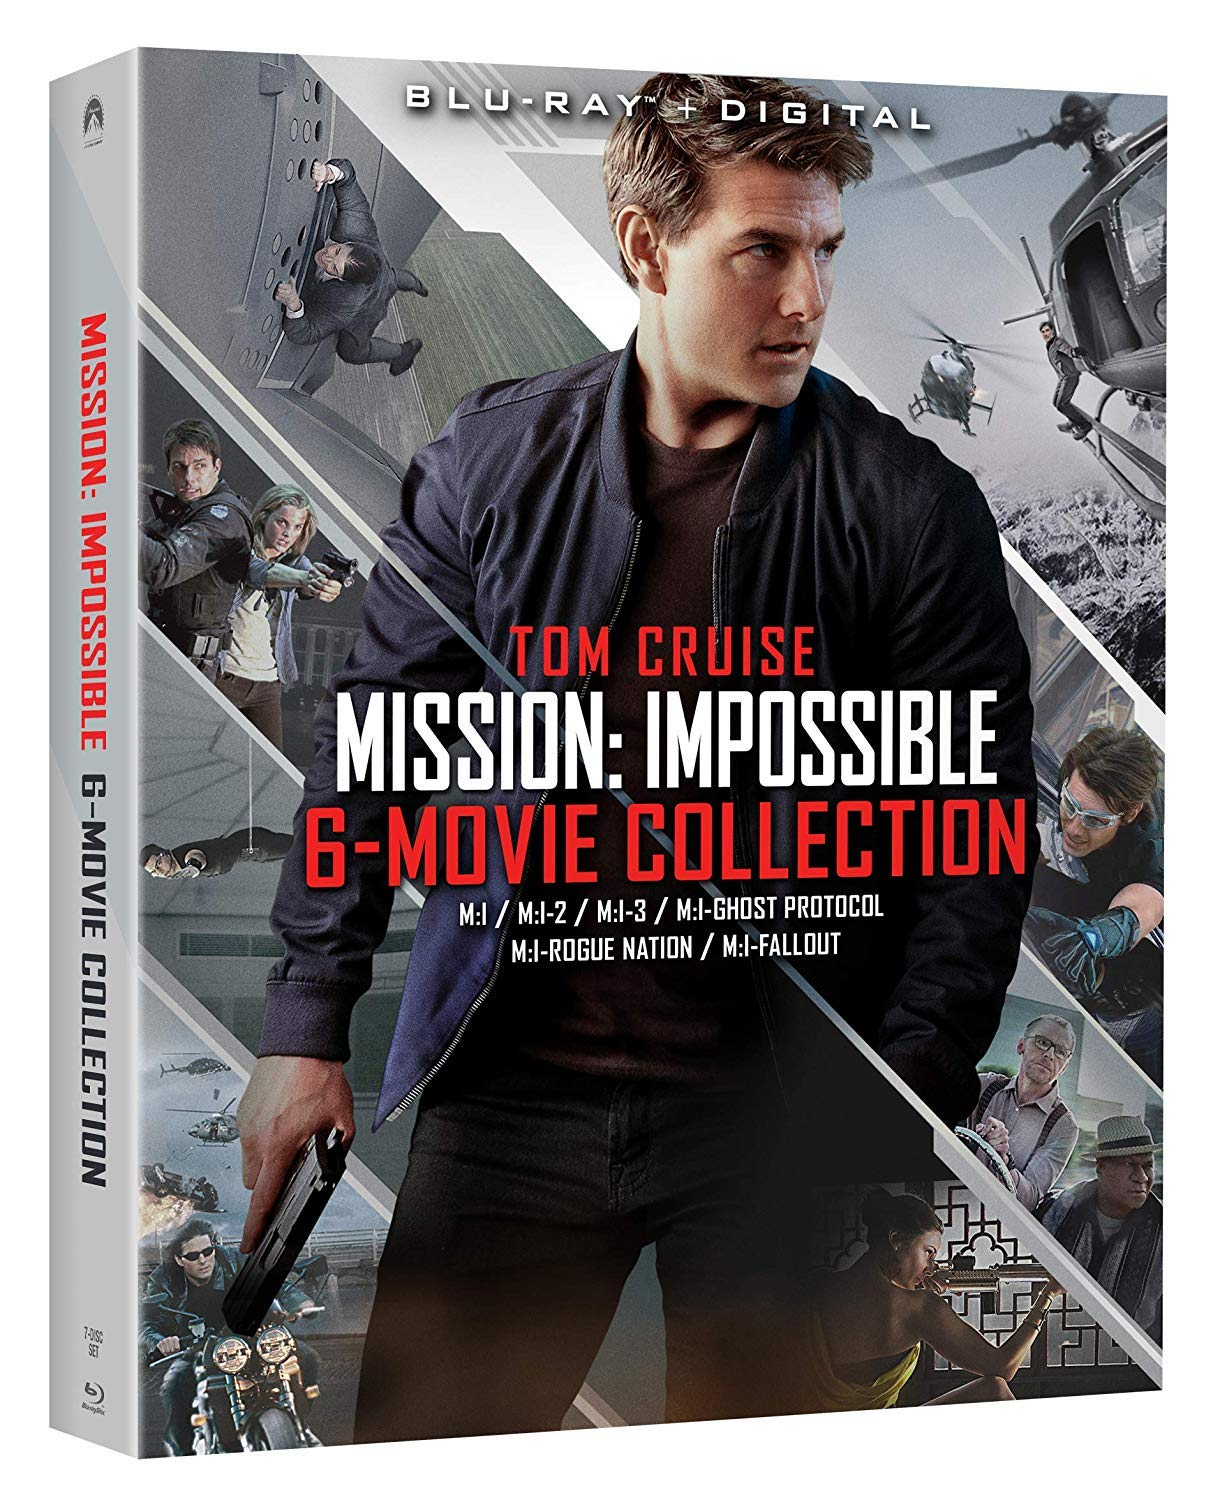 Amazon.com: Mission: Impossible - 6 Movie Collection [Blu-ray + Digital] : Tom Cruise, Christopher McQuarrie: Movies & TV $25.33